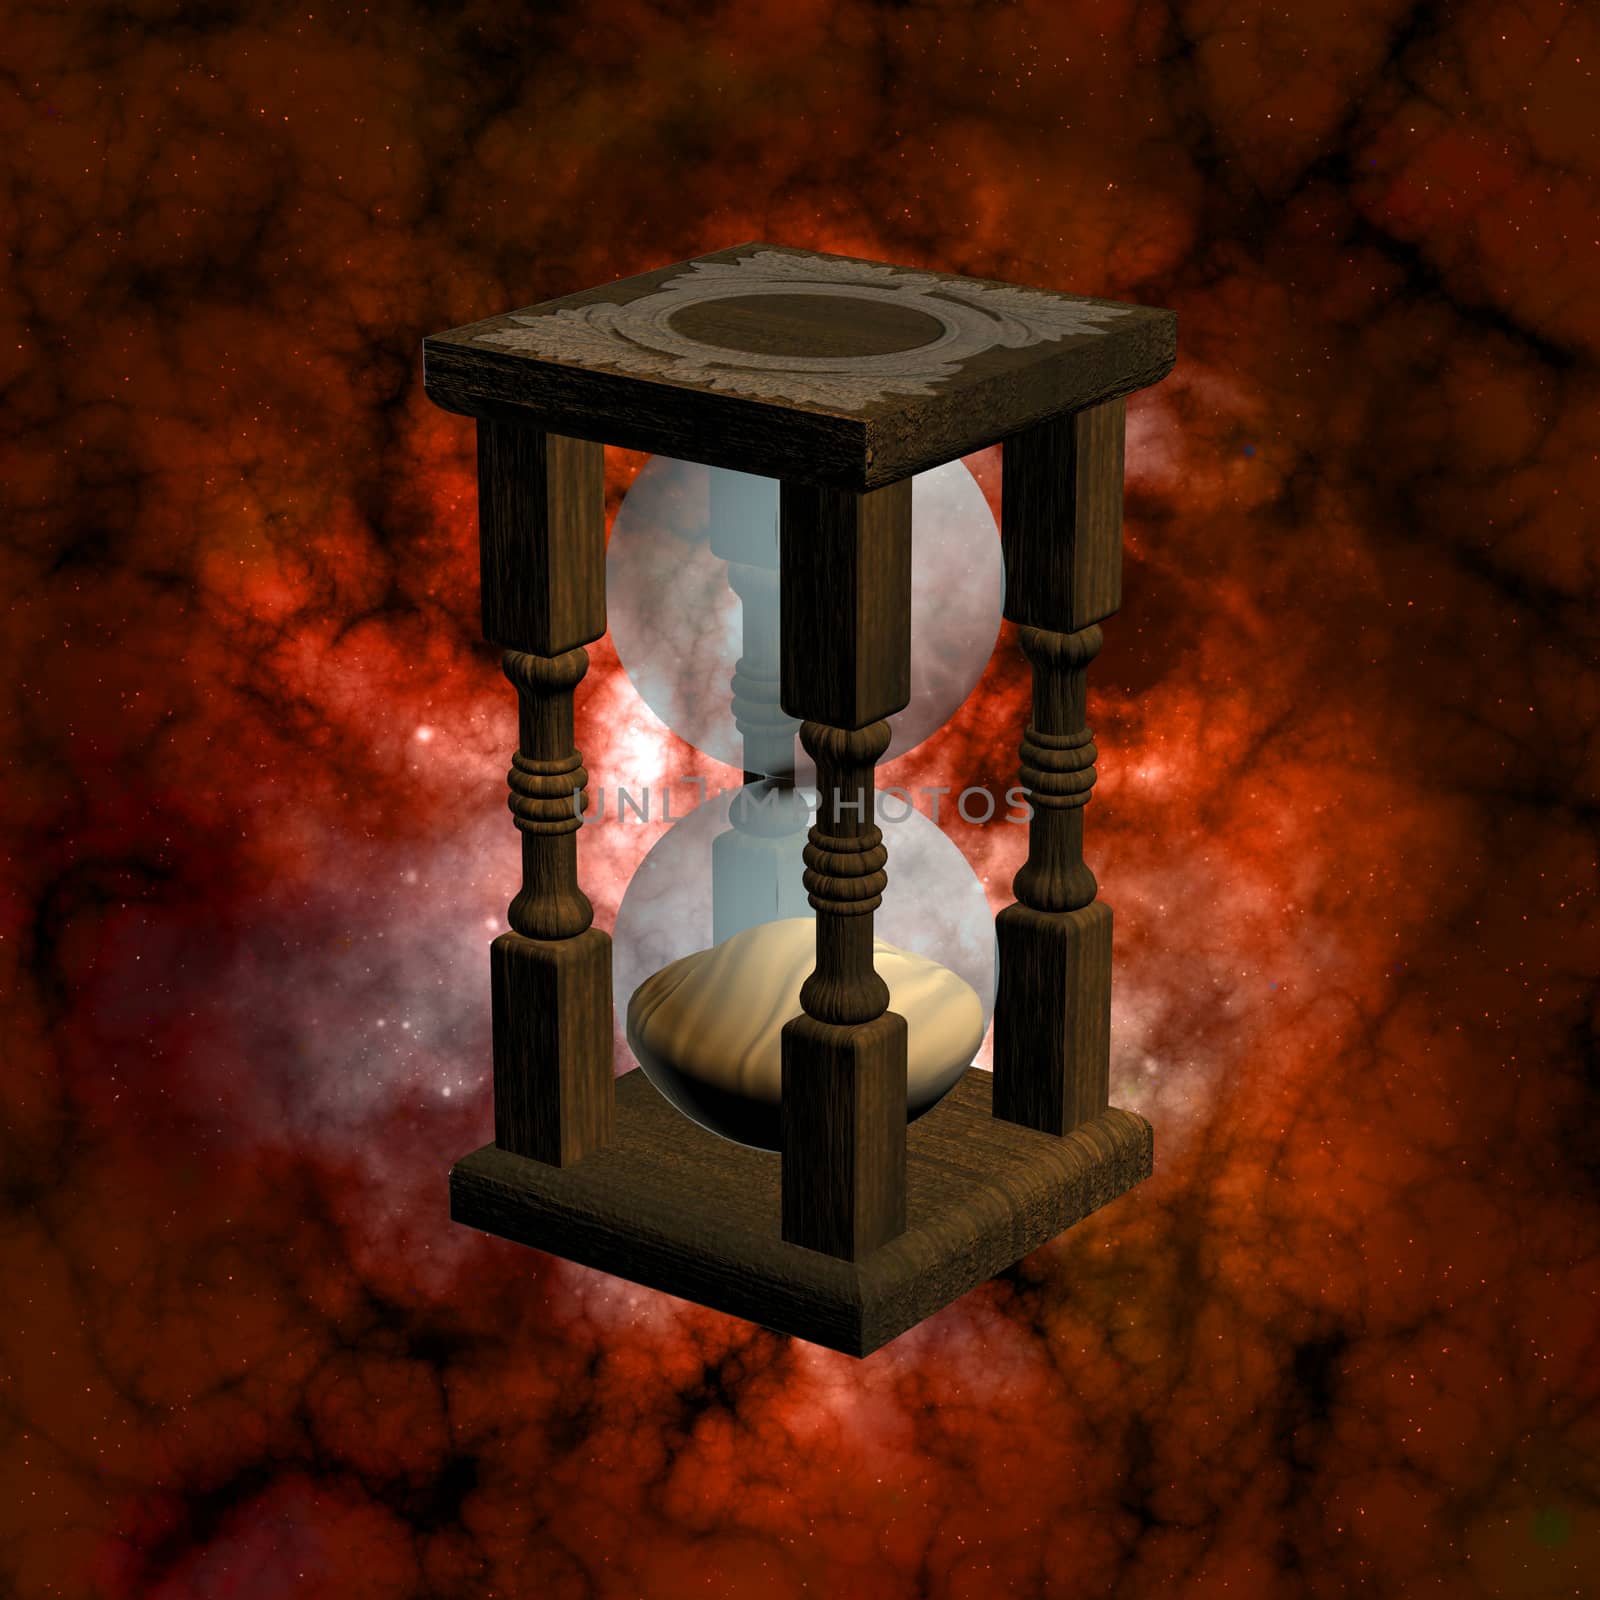 The Begining of Time - A sand timer in the space 